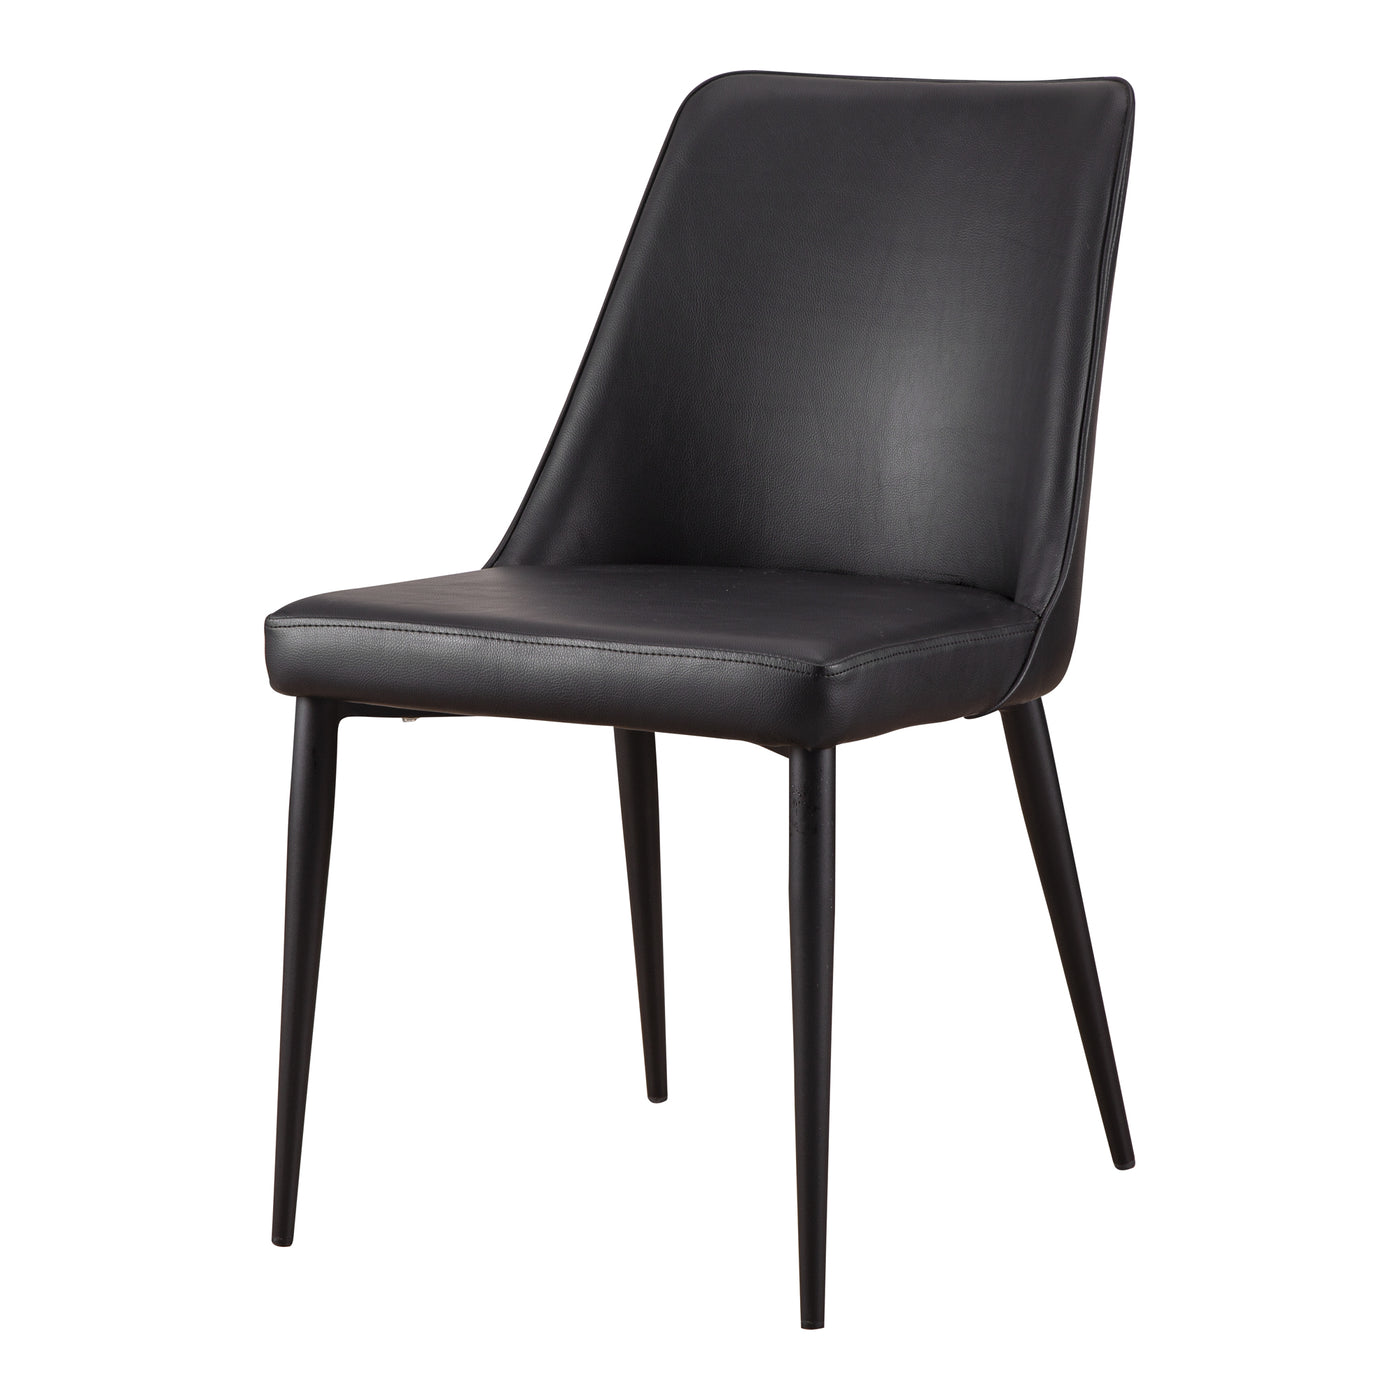 Dig into simplicity with the Lula dining chair. Sleek vegan leather upholstery offers contemporary cool, while a welcoming...